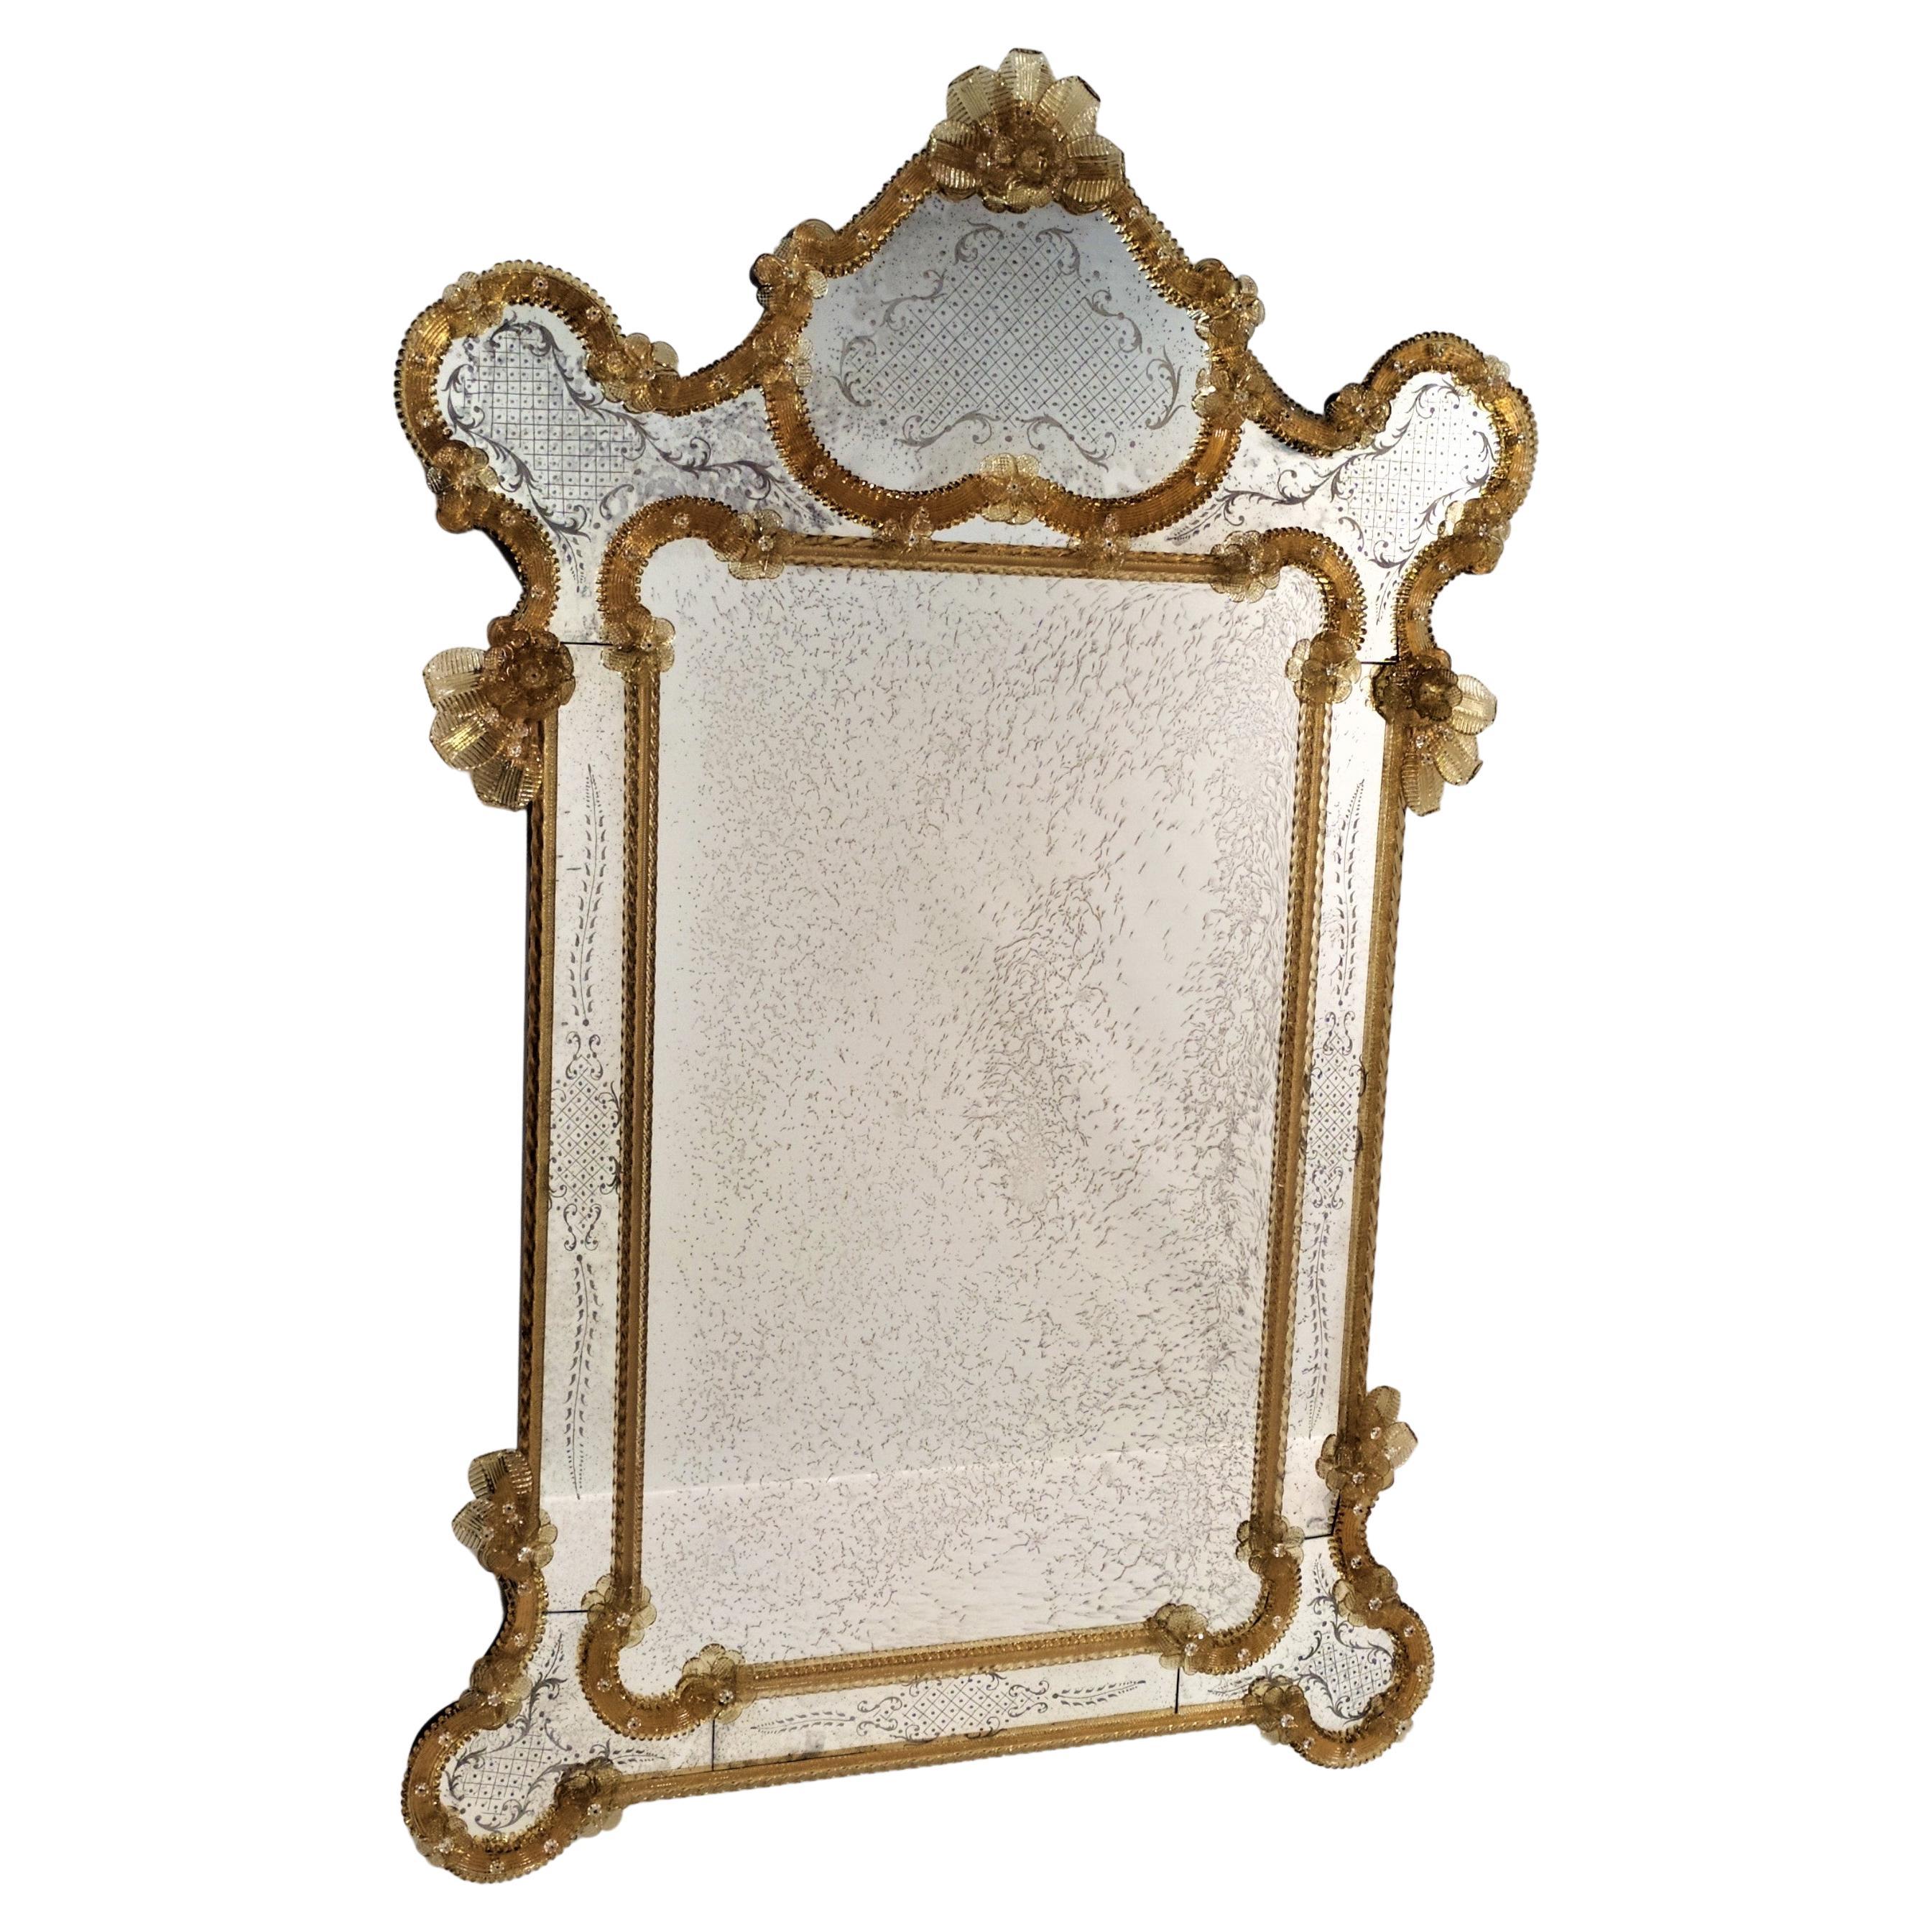 "Verona" Glass Mirror in Venetian Style by Fratelli Tosi, Made in Italy For Sale